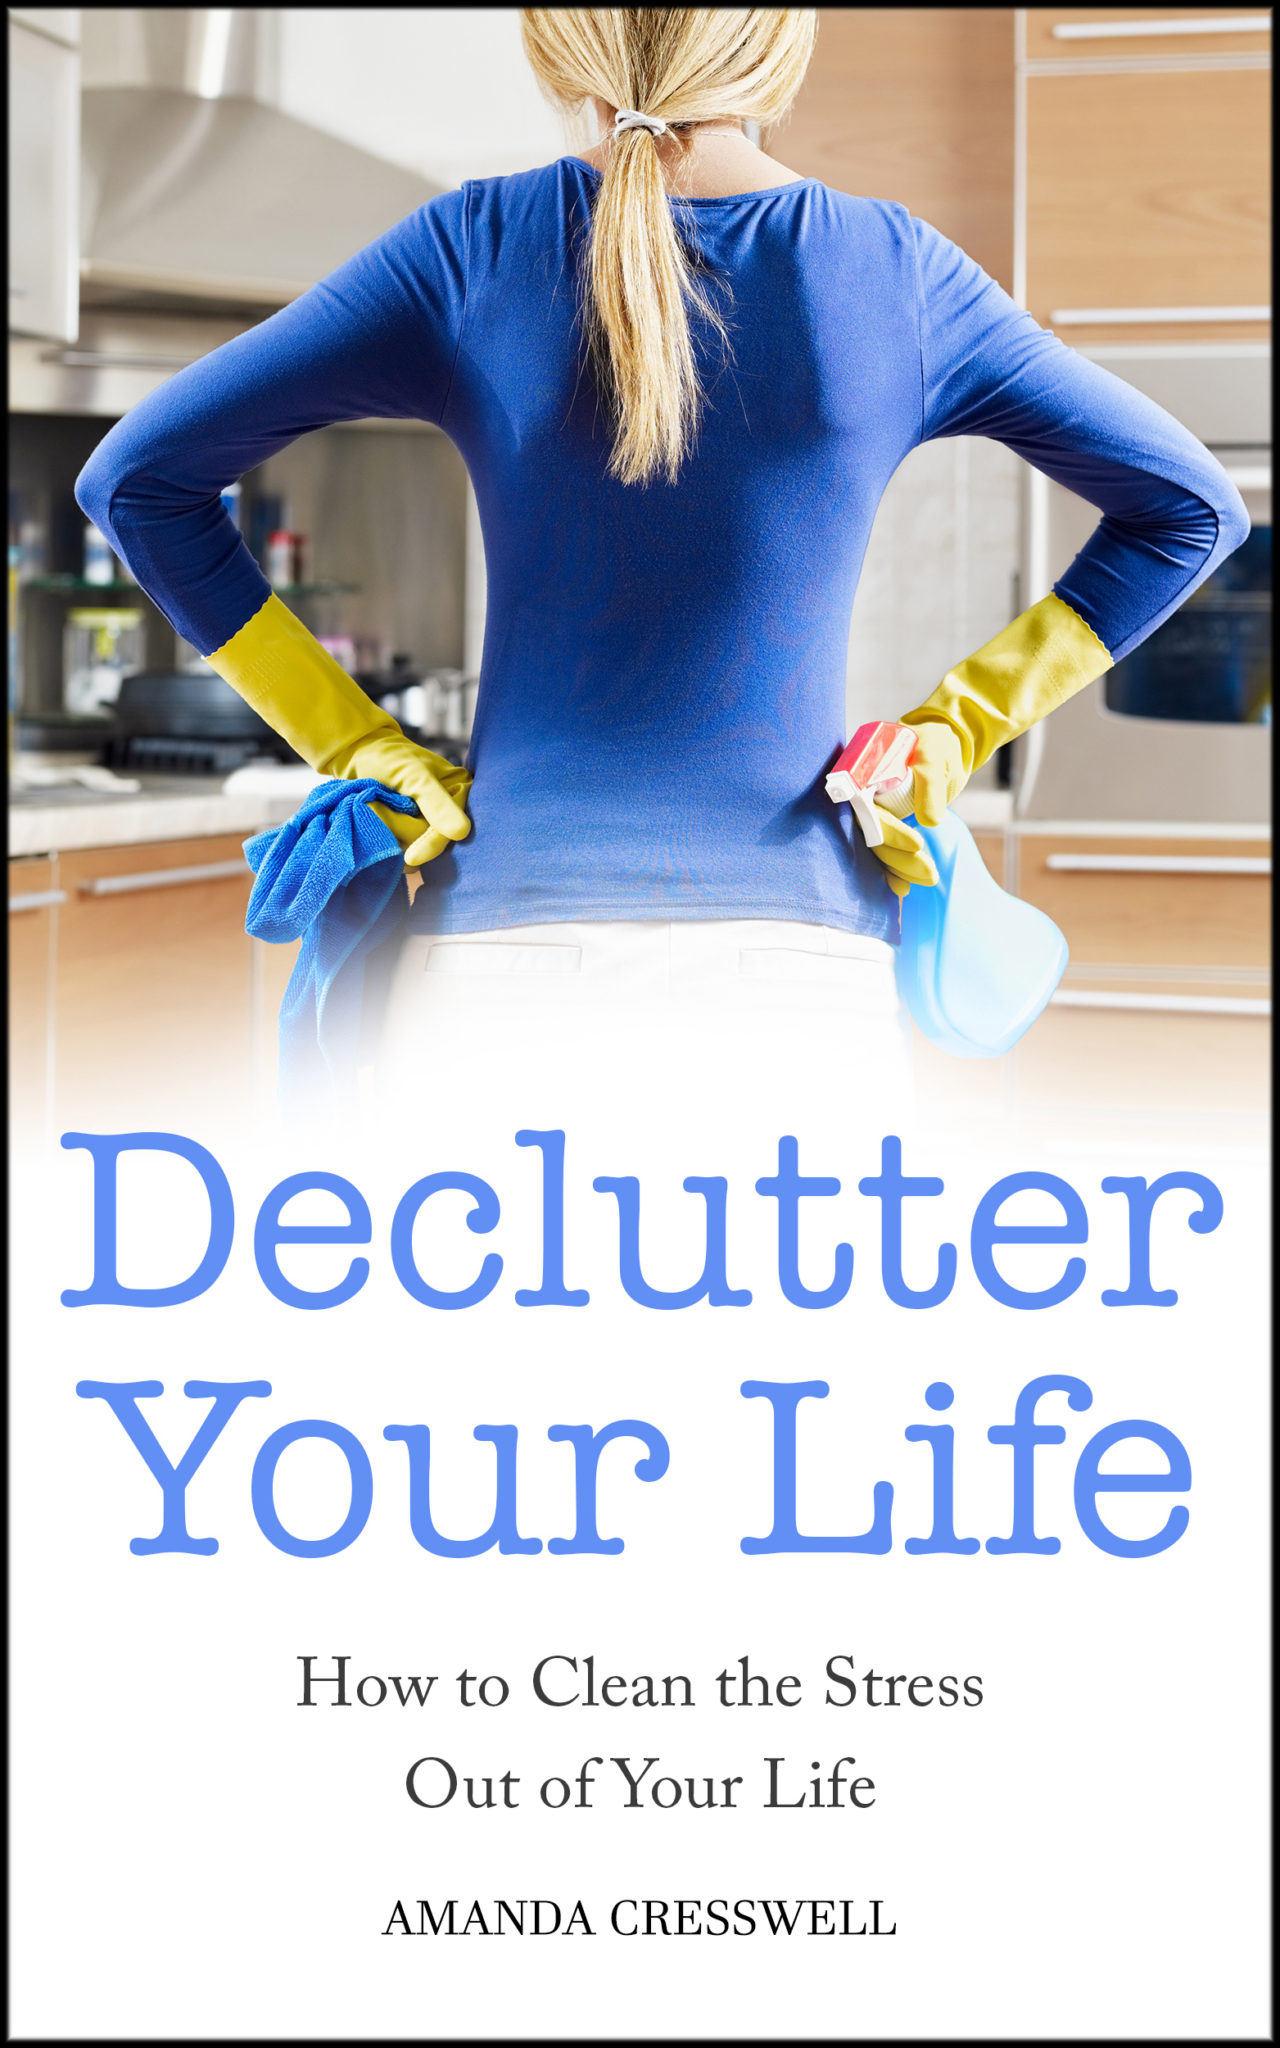 FREE: Declutter Your Life:  How To Clean the Stress Out of Your Life by Amanda Cresswell